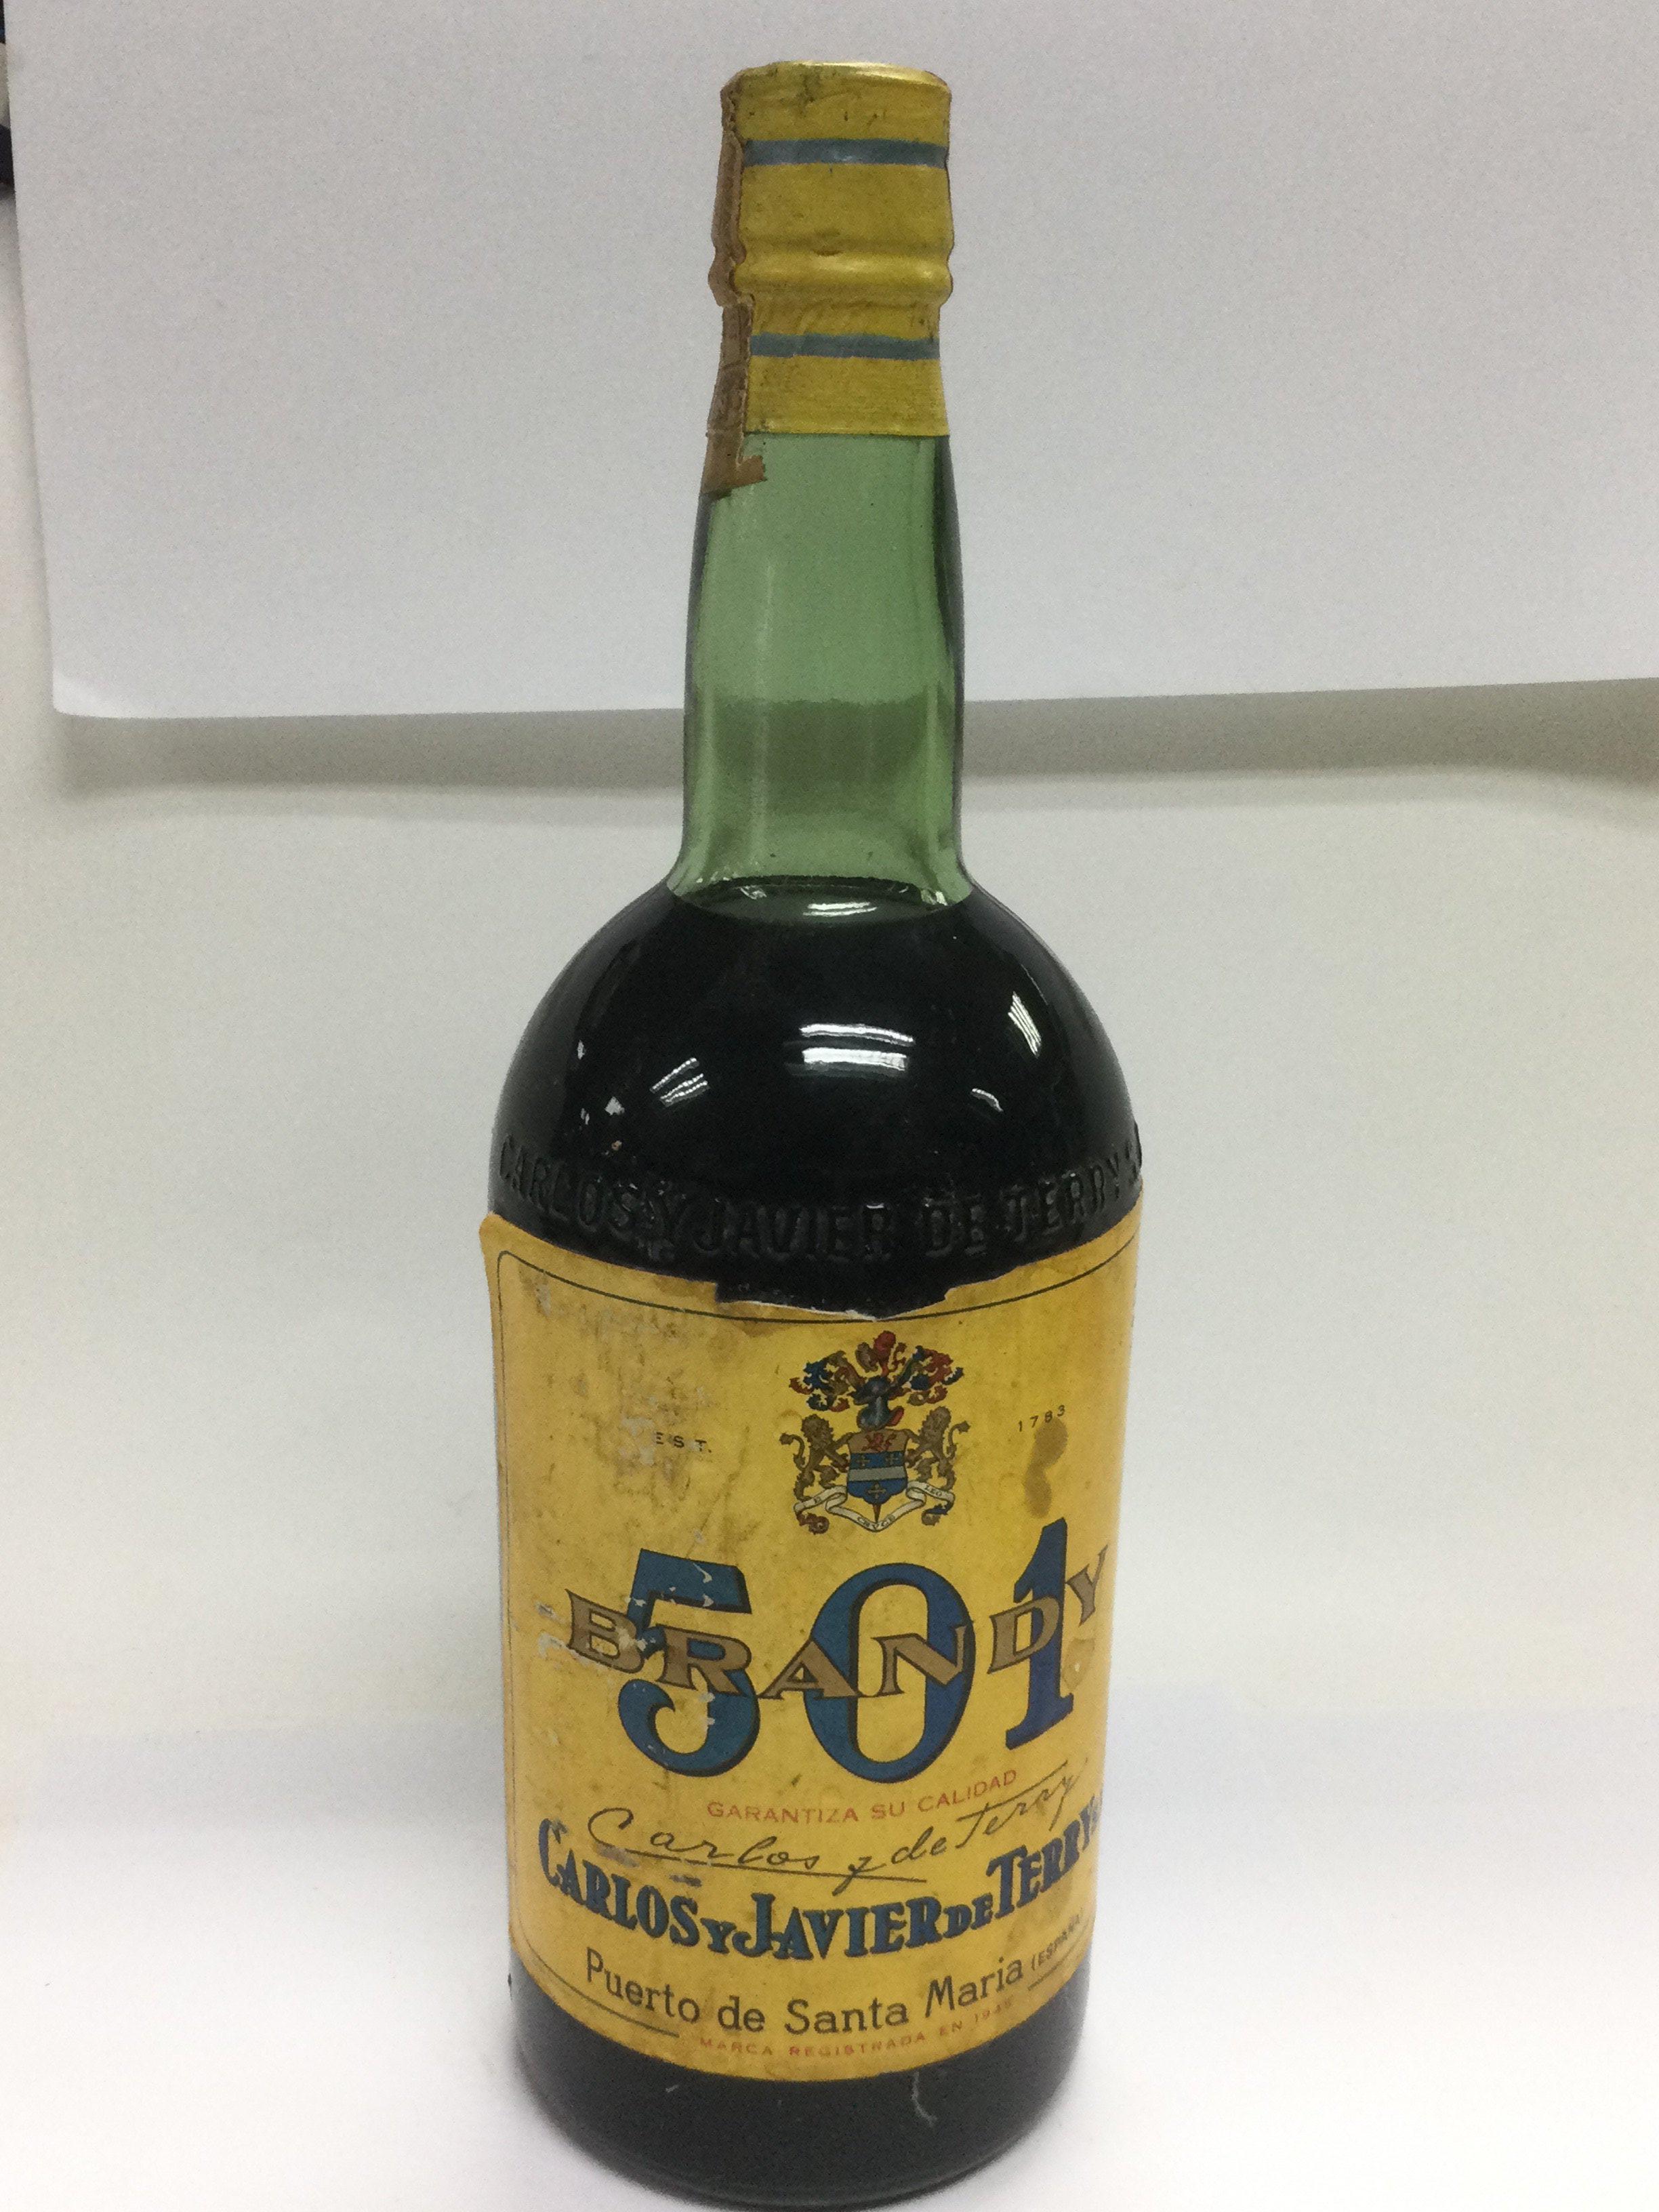 A 1968 3 litre bottle of Terry Brandy, Shipping ca